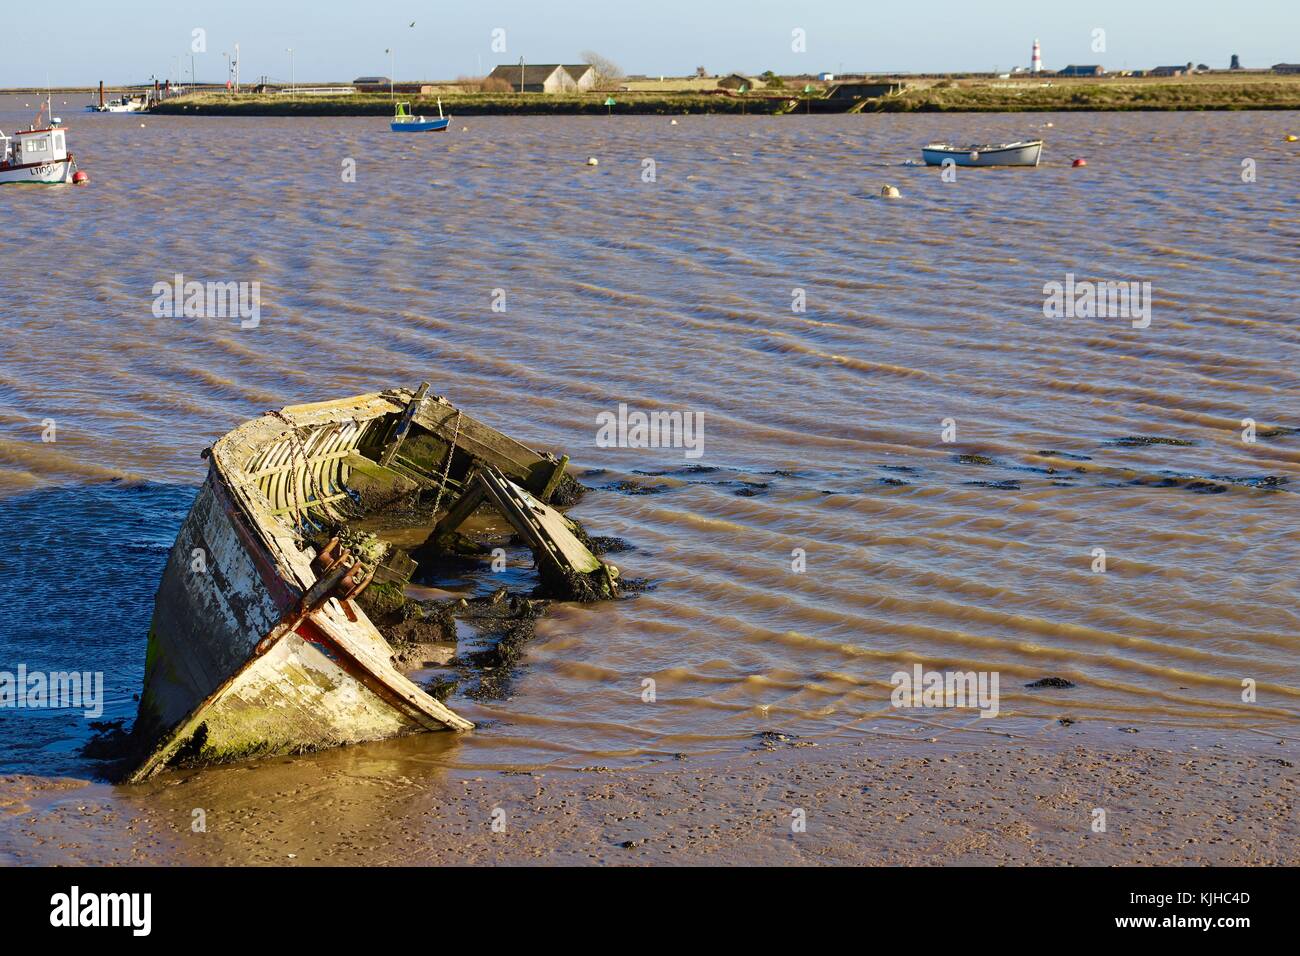 A derelict abandoned wooden boat on its side in the muddy River Alde at Orford Quay. Suffolk, UK. Stock Photo